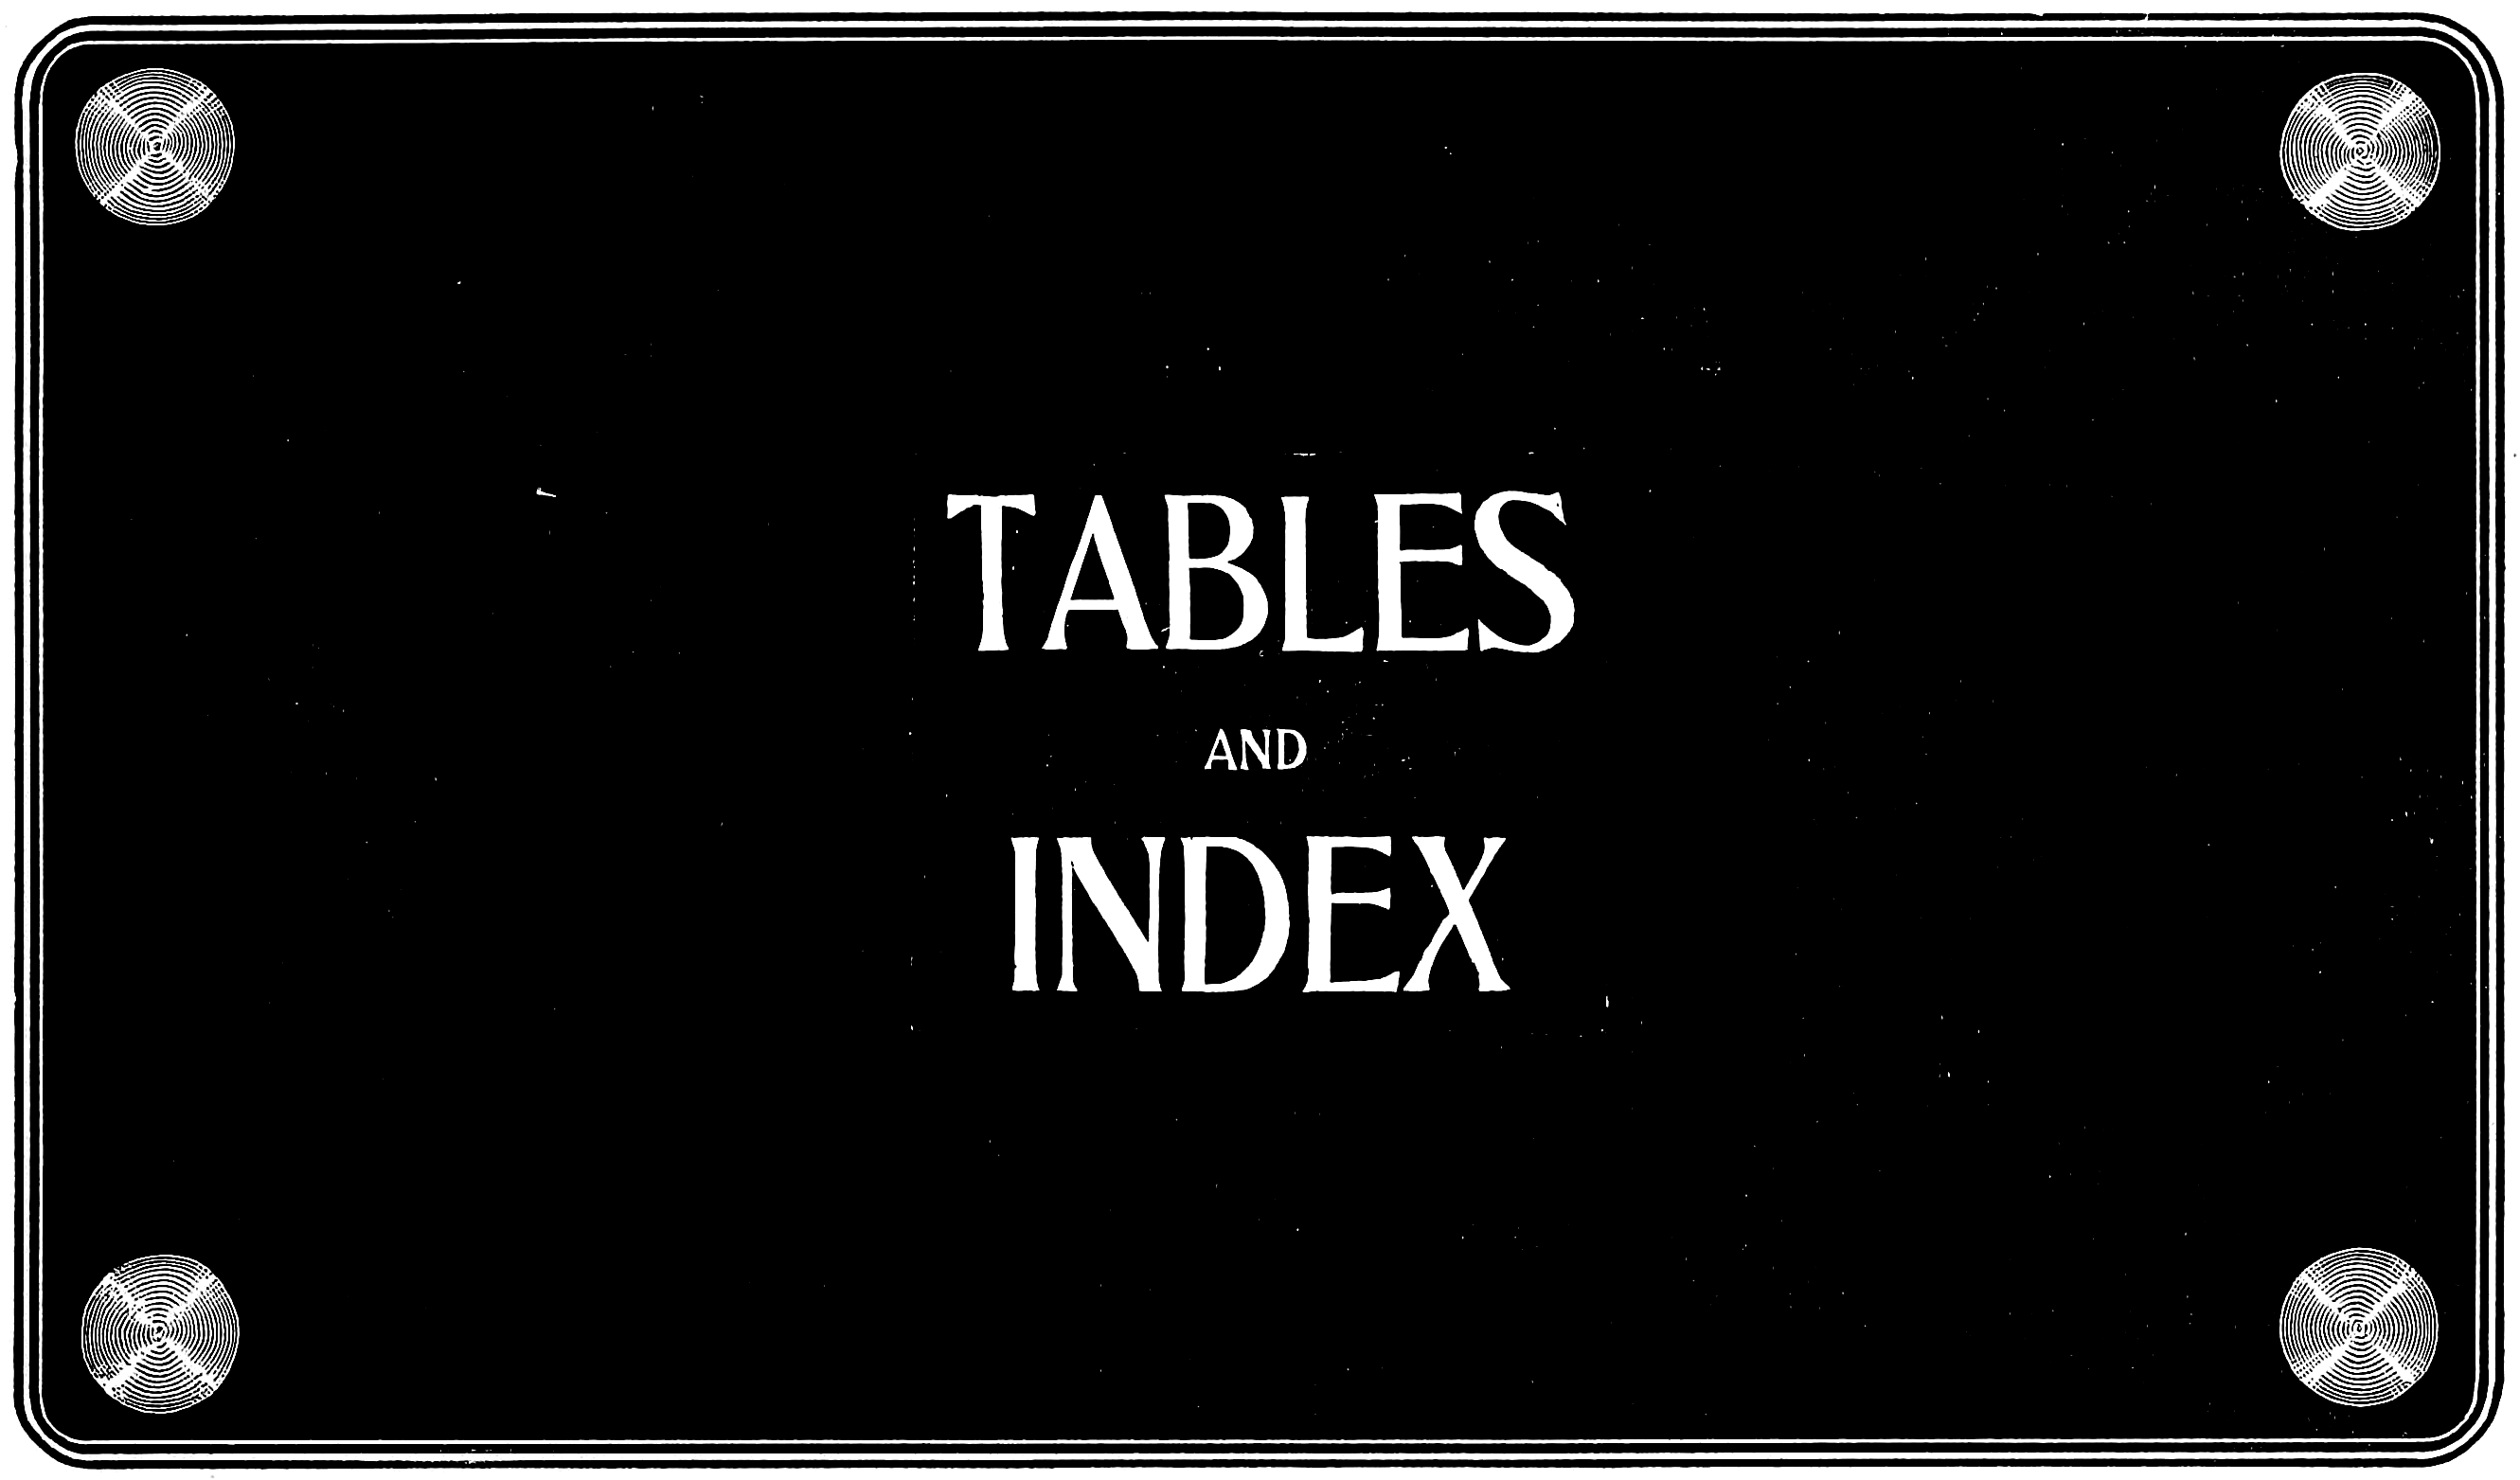 TABLES AND INDEX